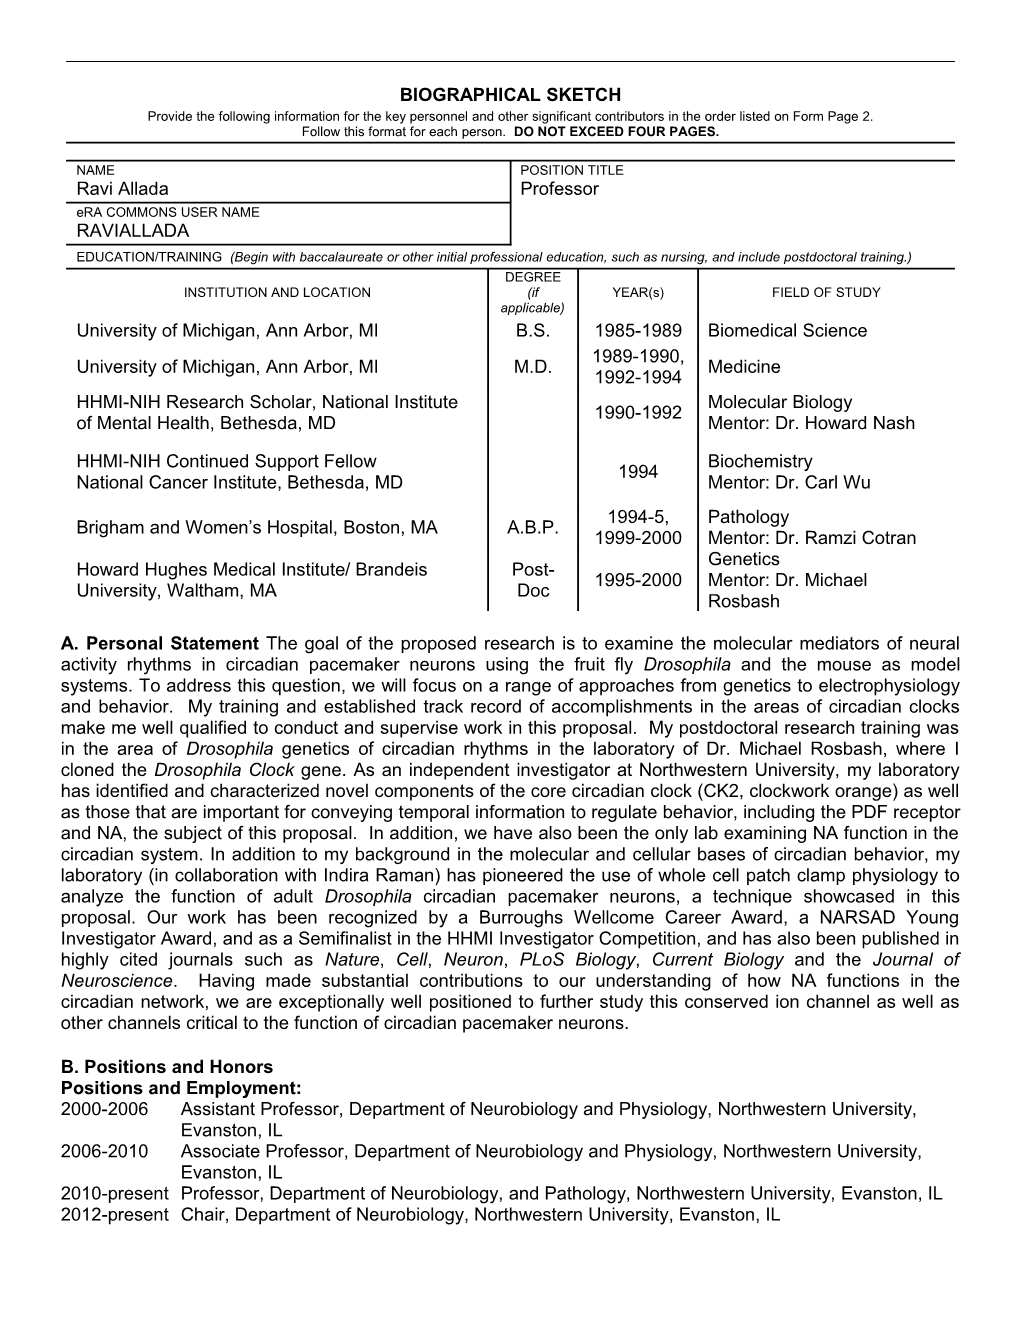 PHS 398 (Rev. 9/04), Biographical Sketch Format Page s17